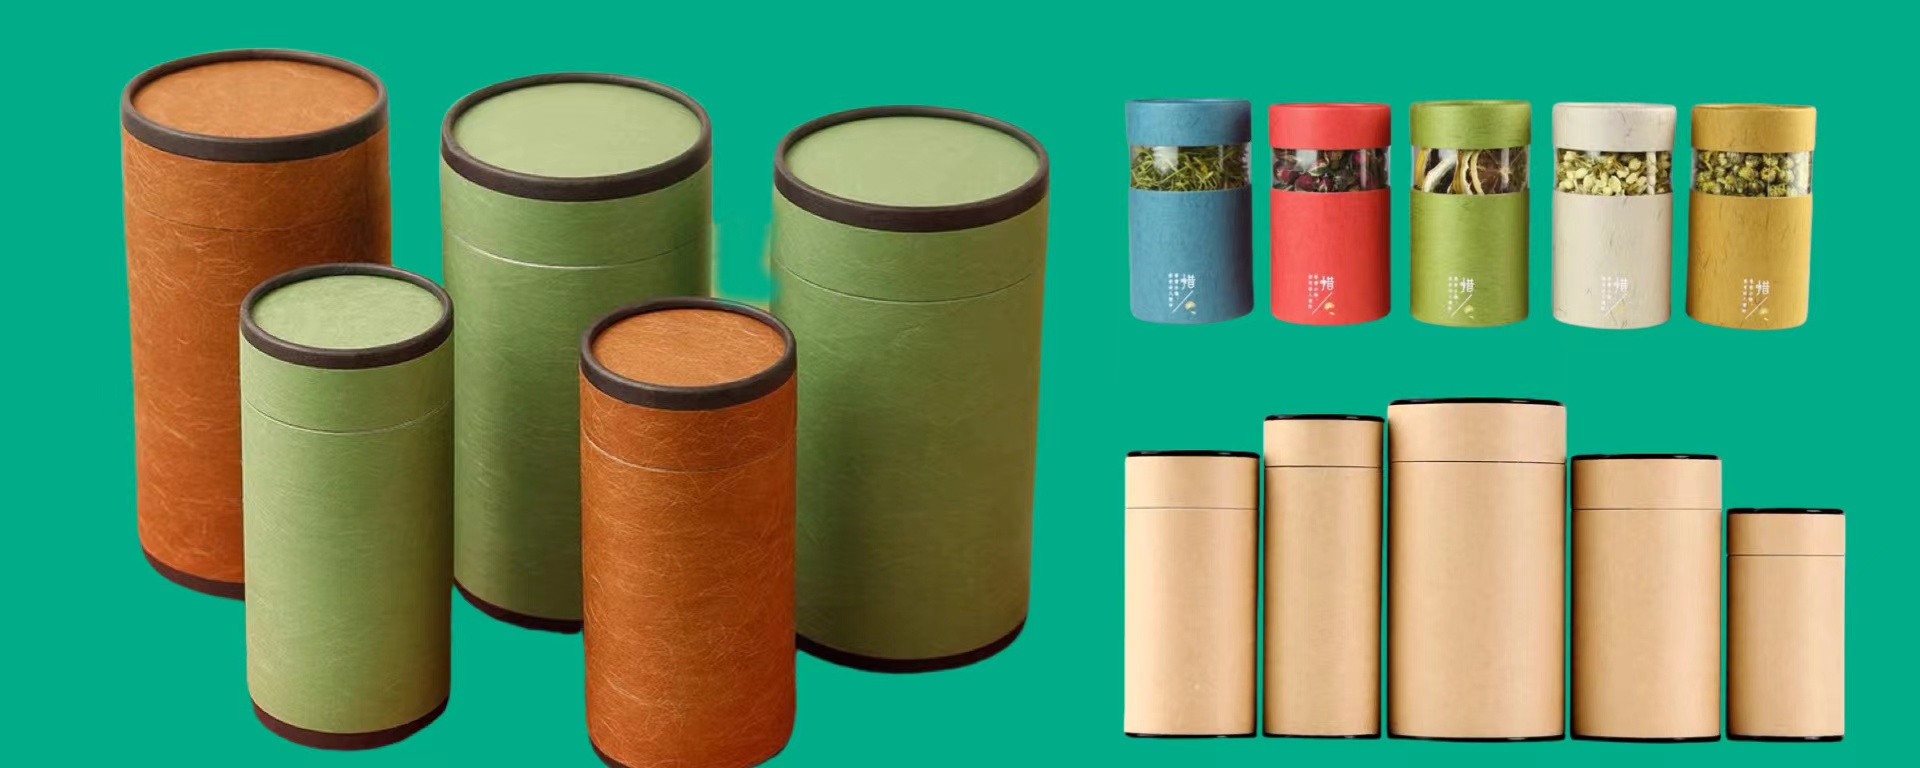 Green, Gorgeous, Groundbreaking: Paper Tubes for the Future